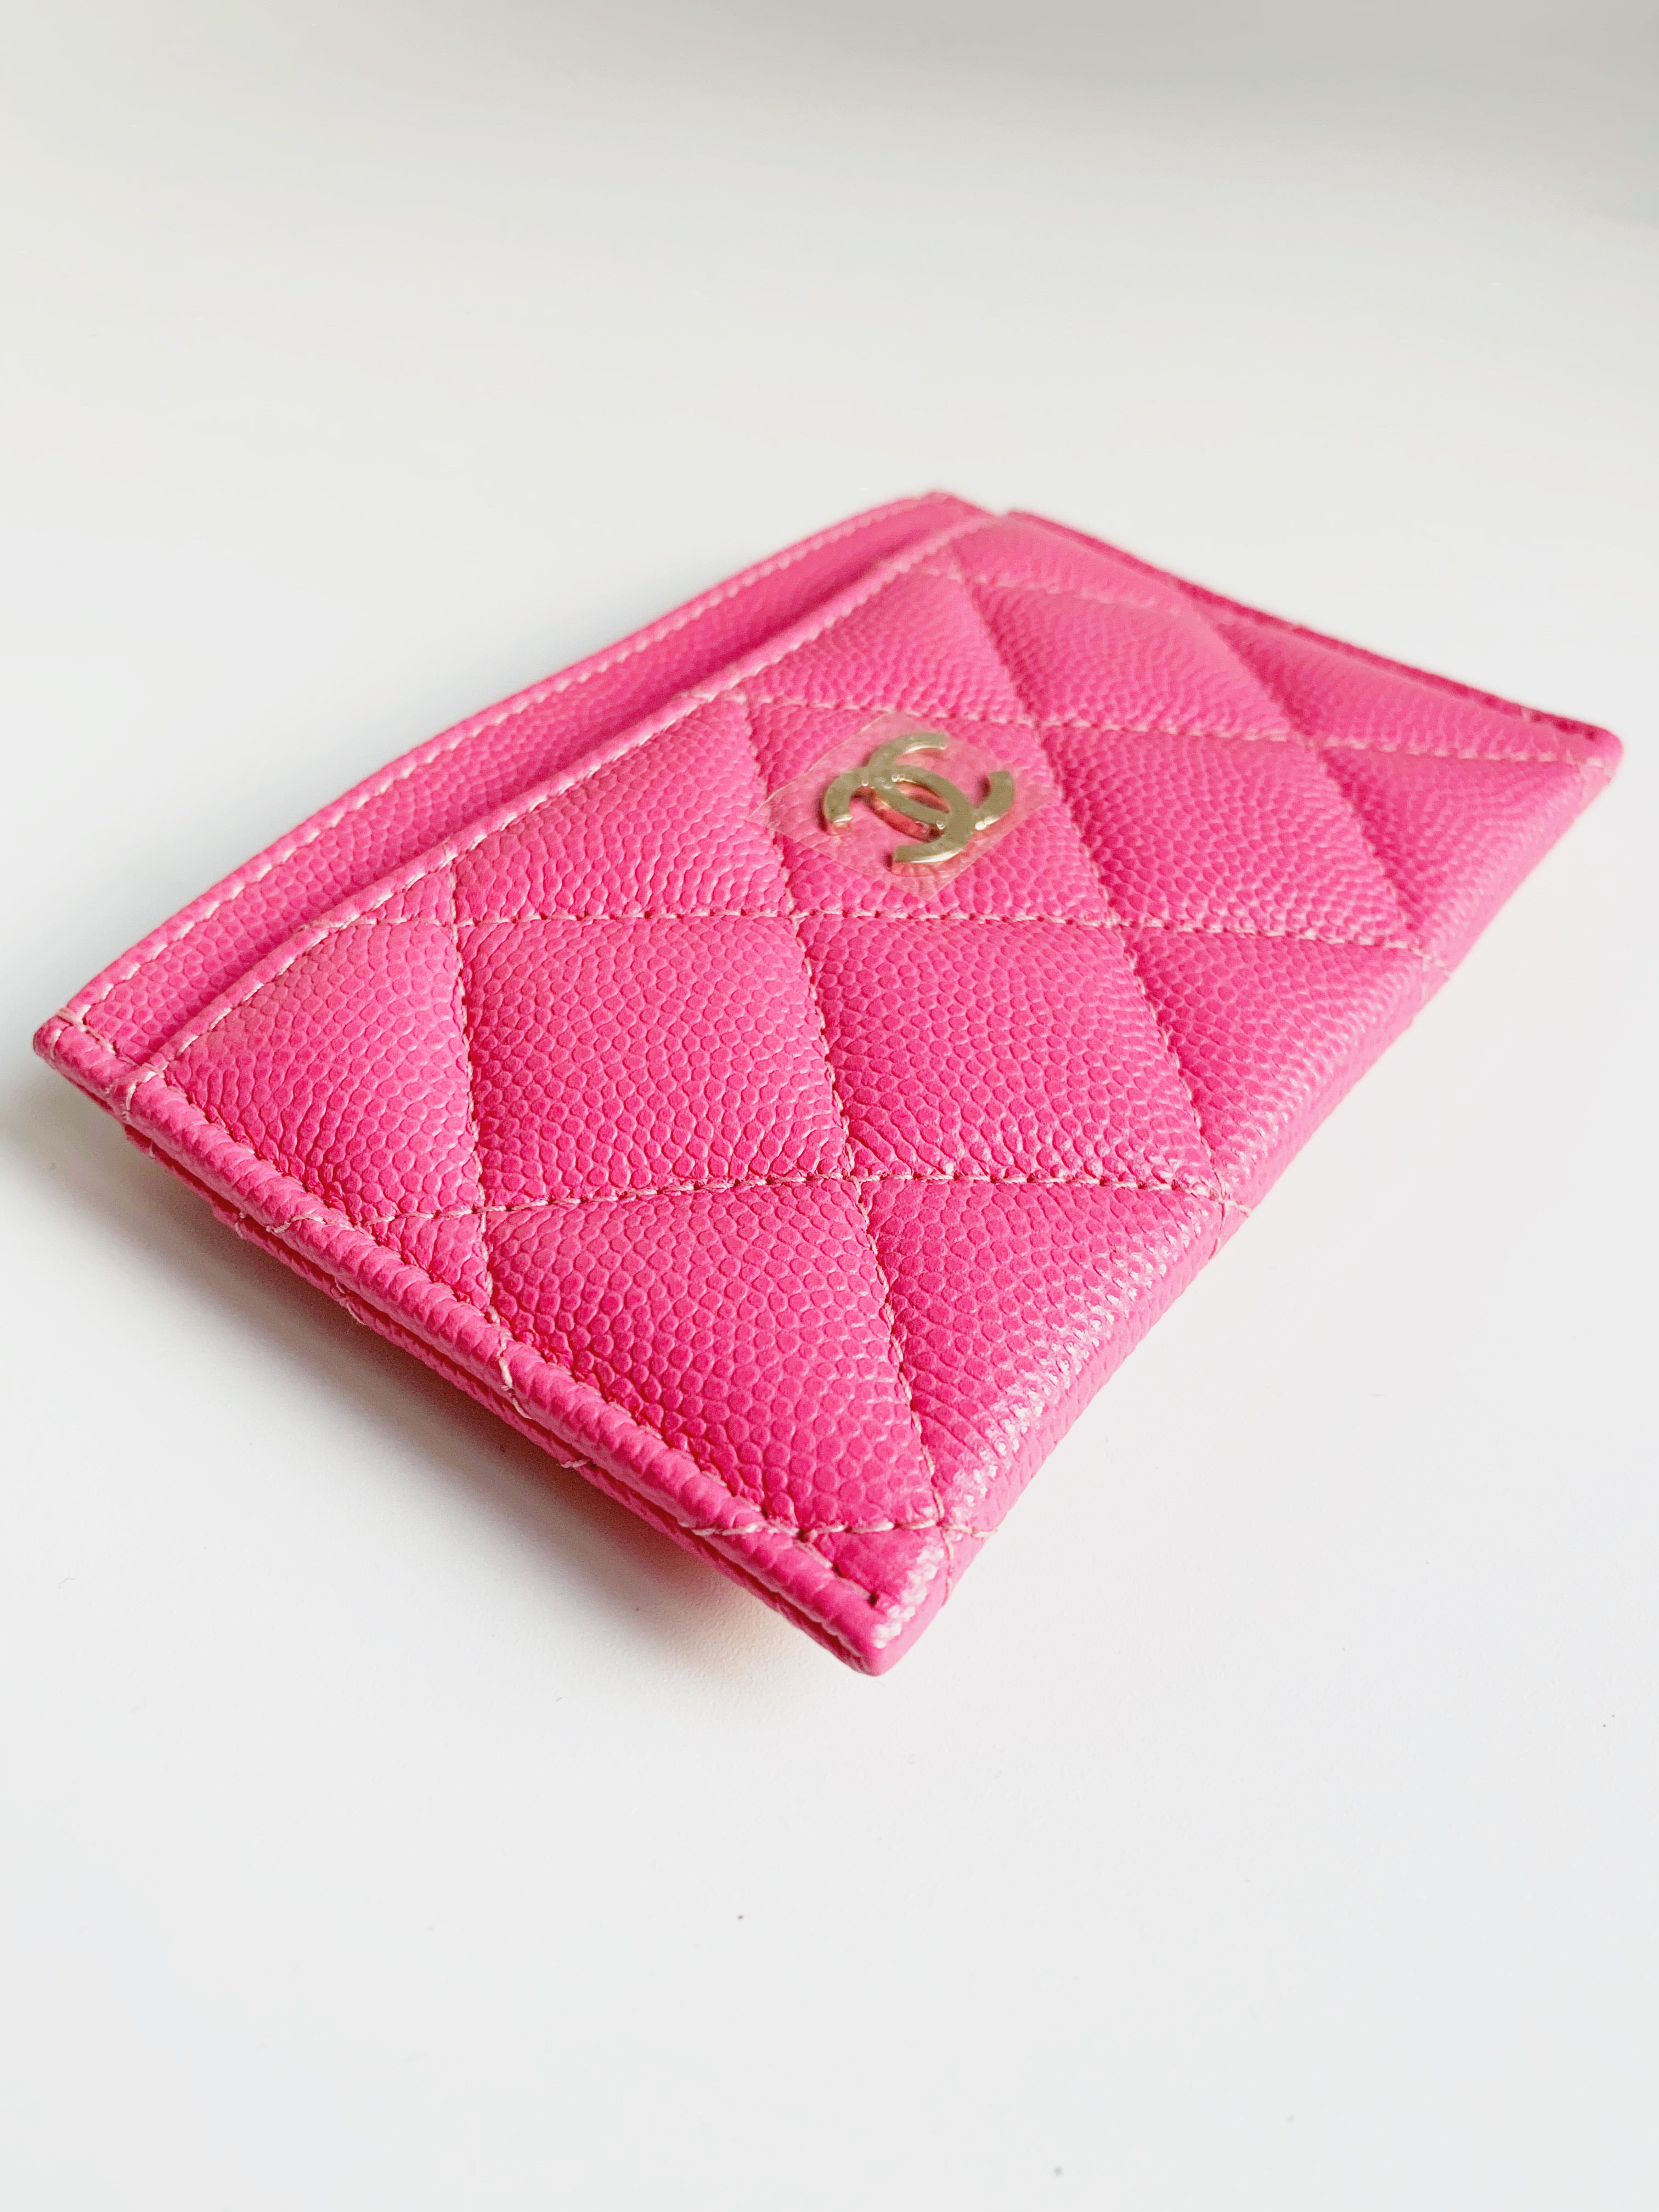 SOLD Brand New Chanel Flap Card Holder Pink SHW  Chanel flap Chanel bag  Chanel